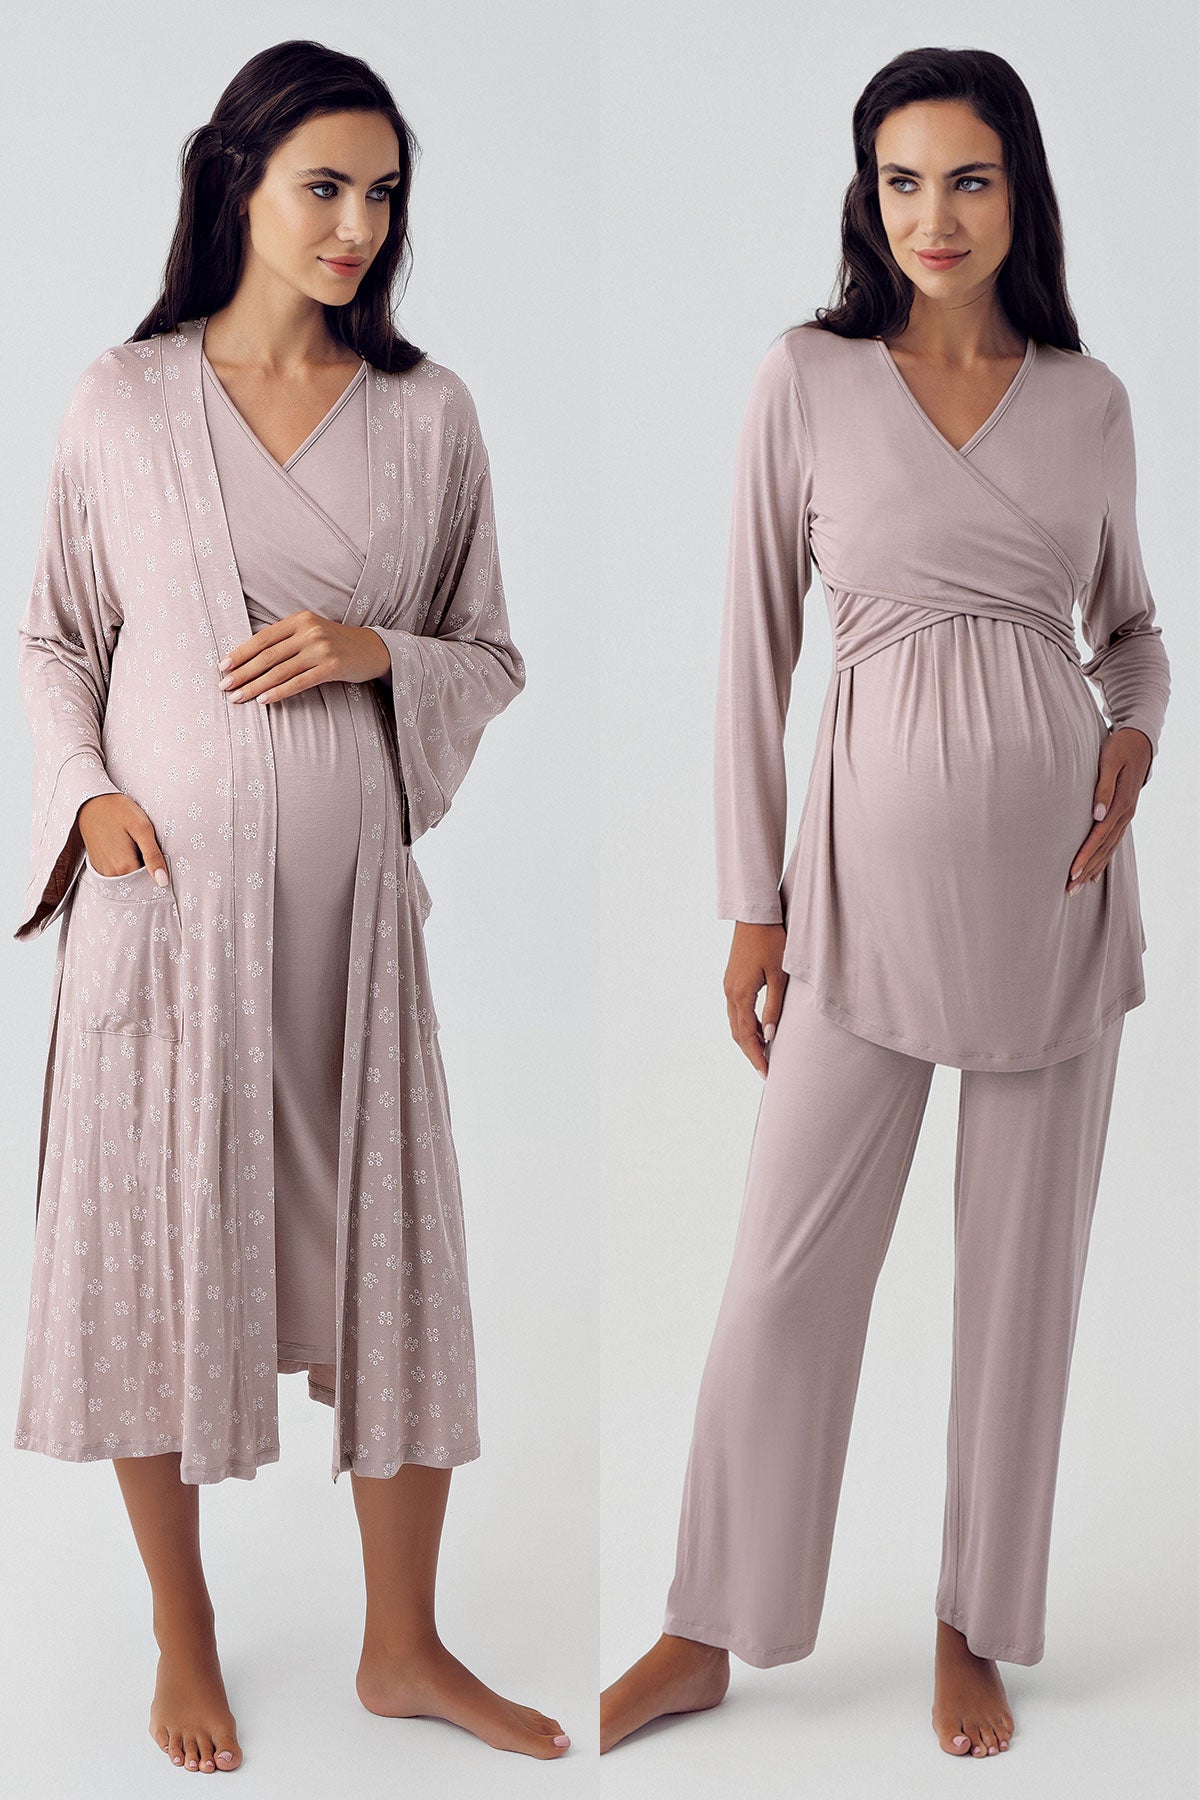 Tuba 23407 Sleeves with Feather Detailed Maternity Nursing